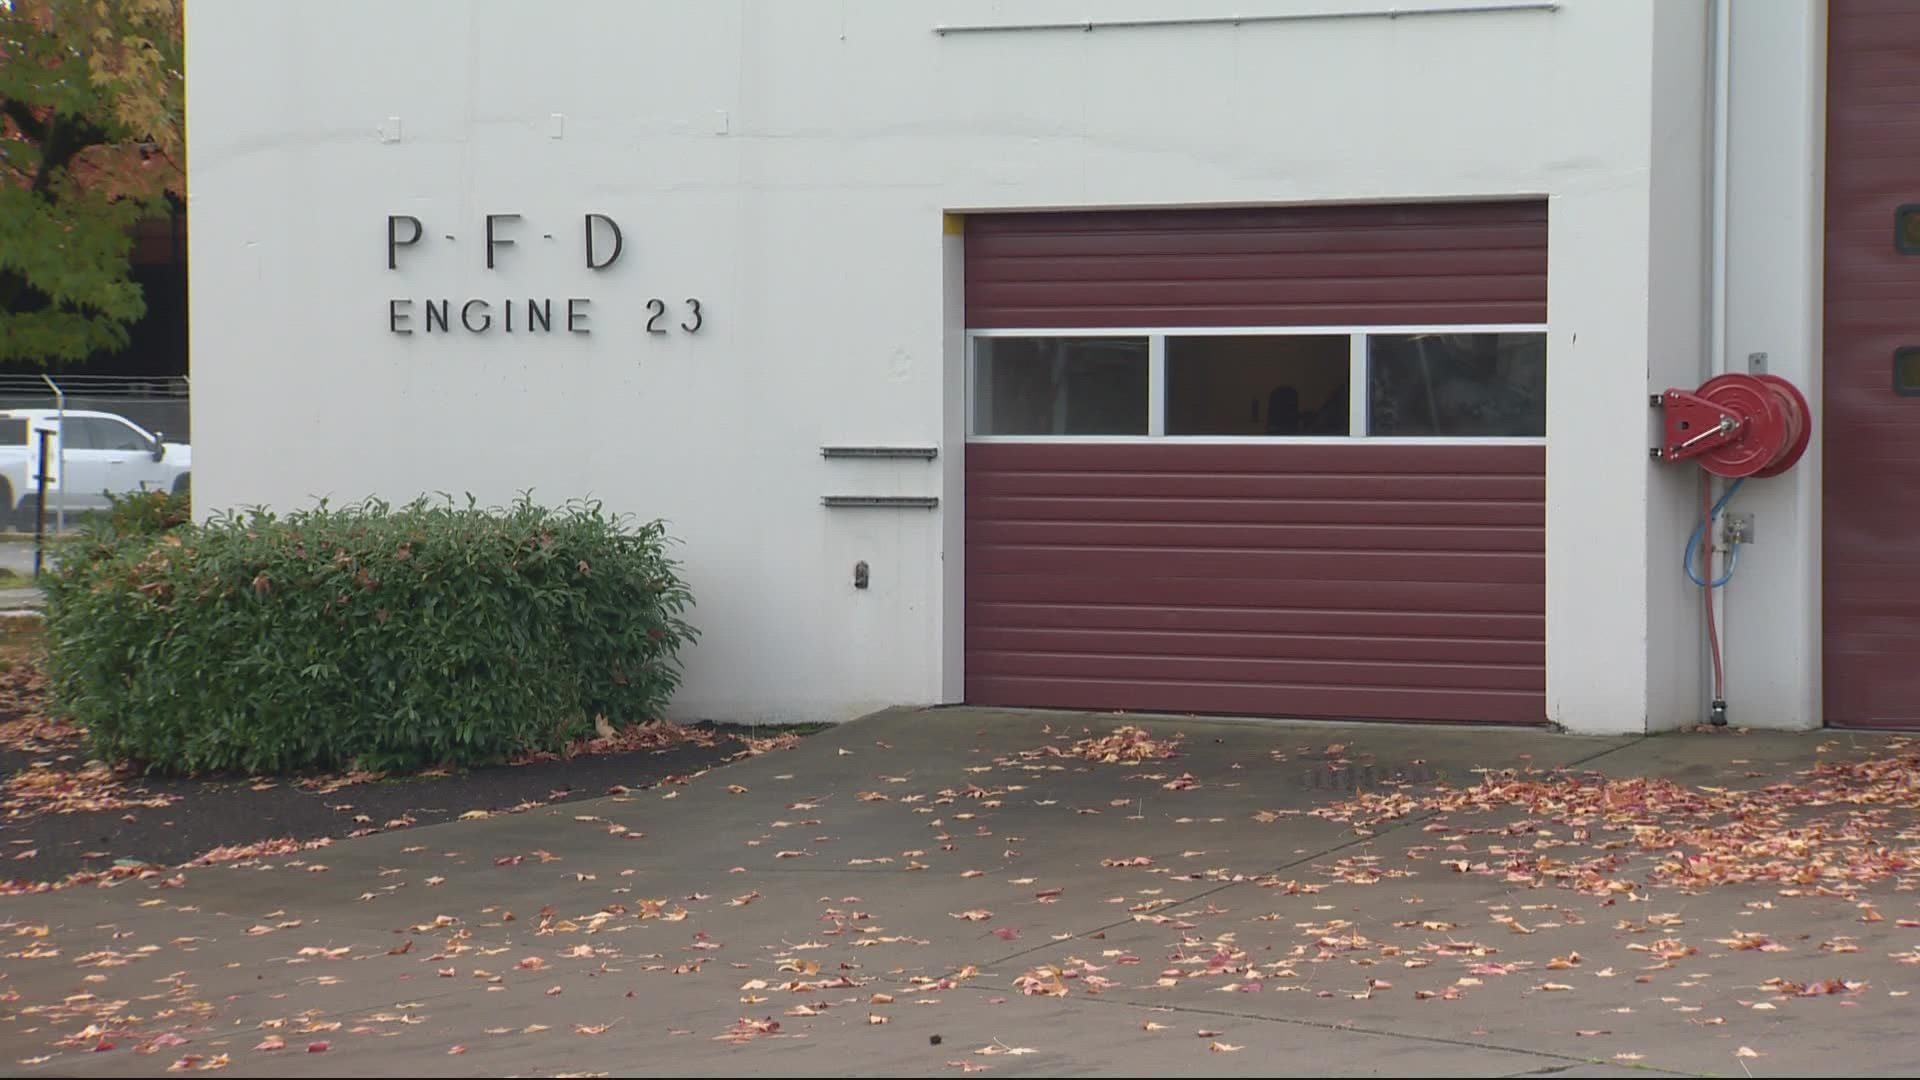 The Portland Firefighters Association is asking the city for funding to bring the southeast Portland station up to full staffing levels.